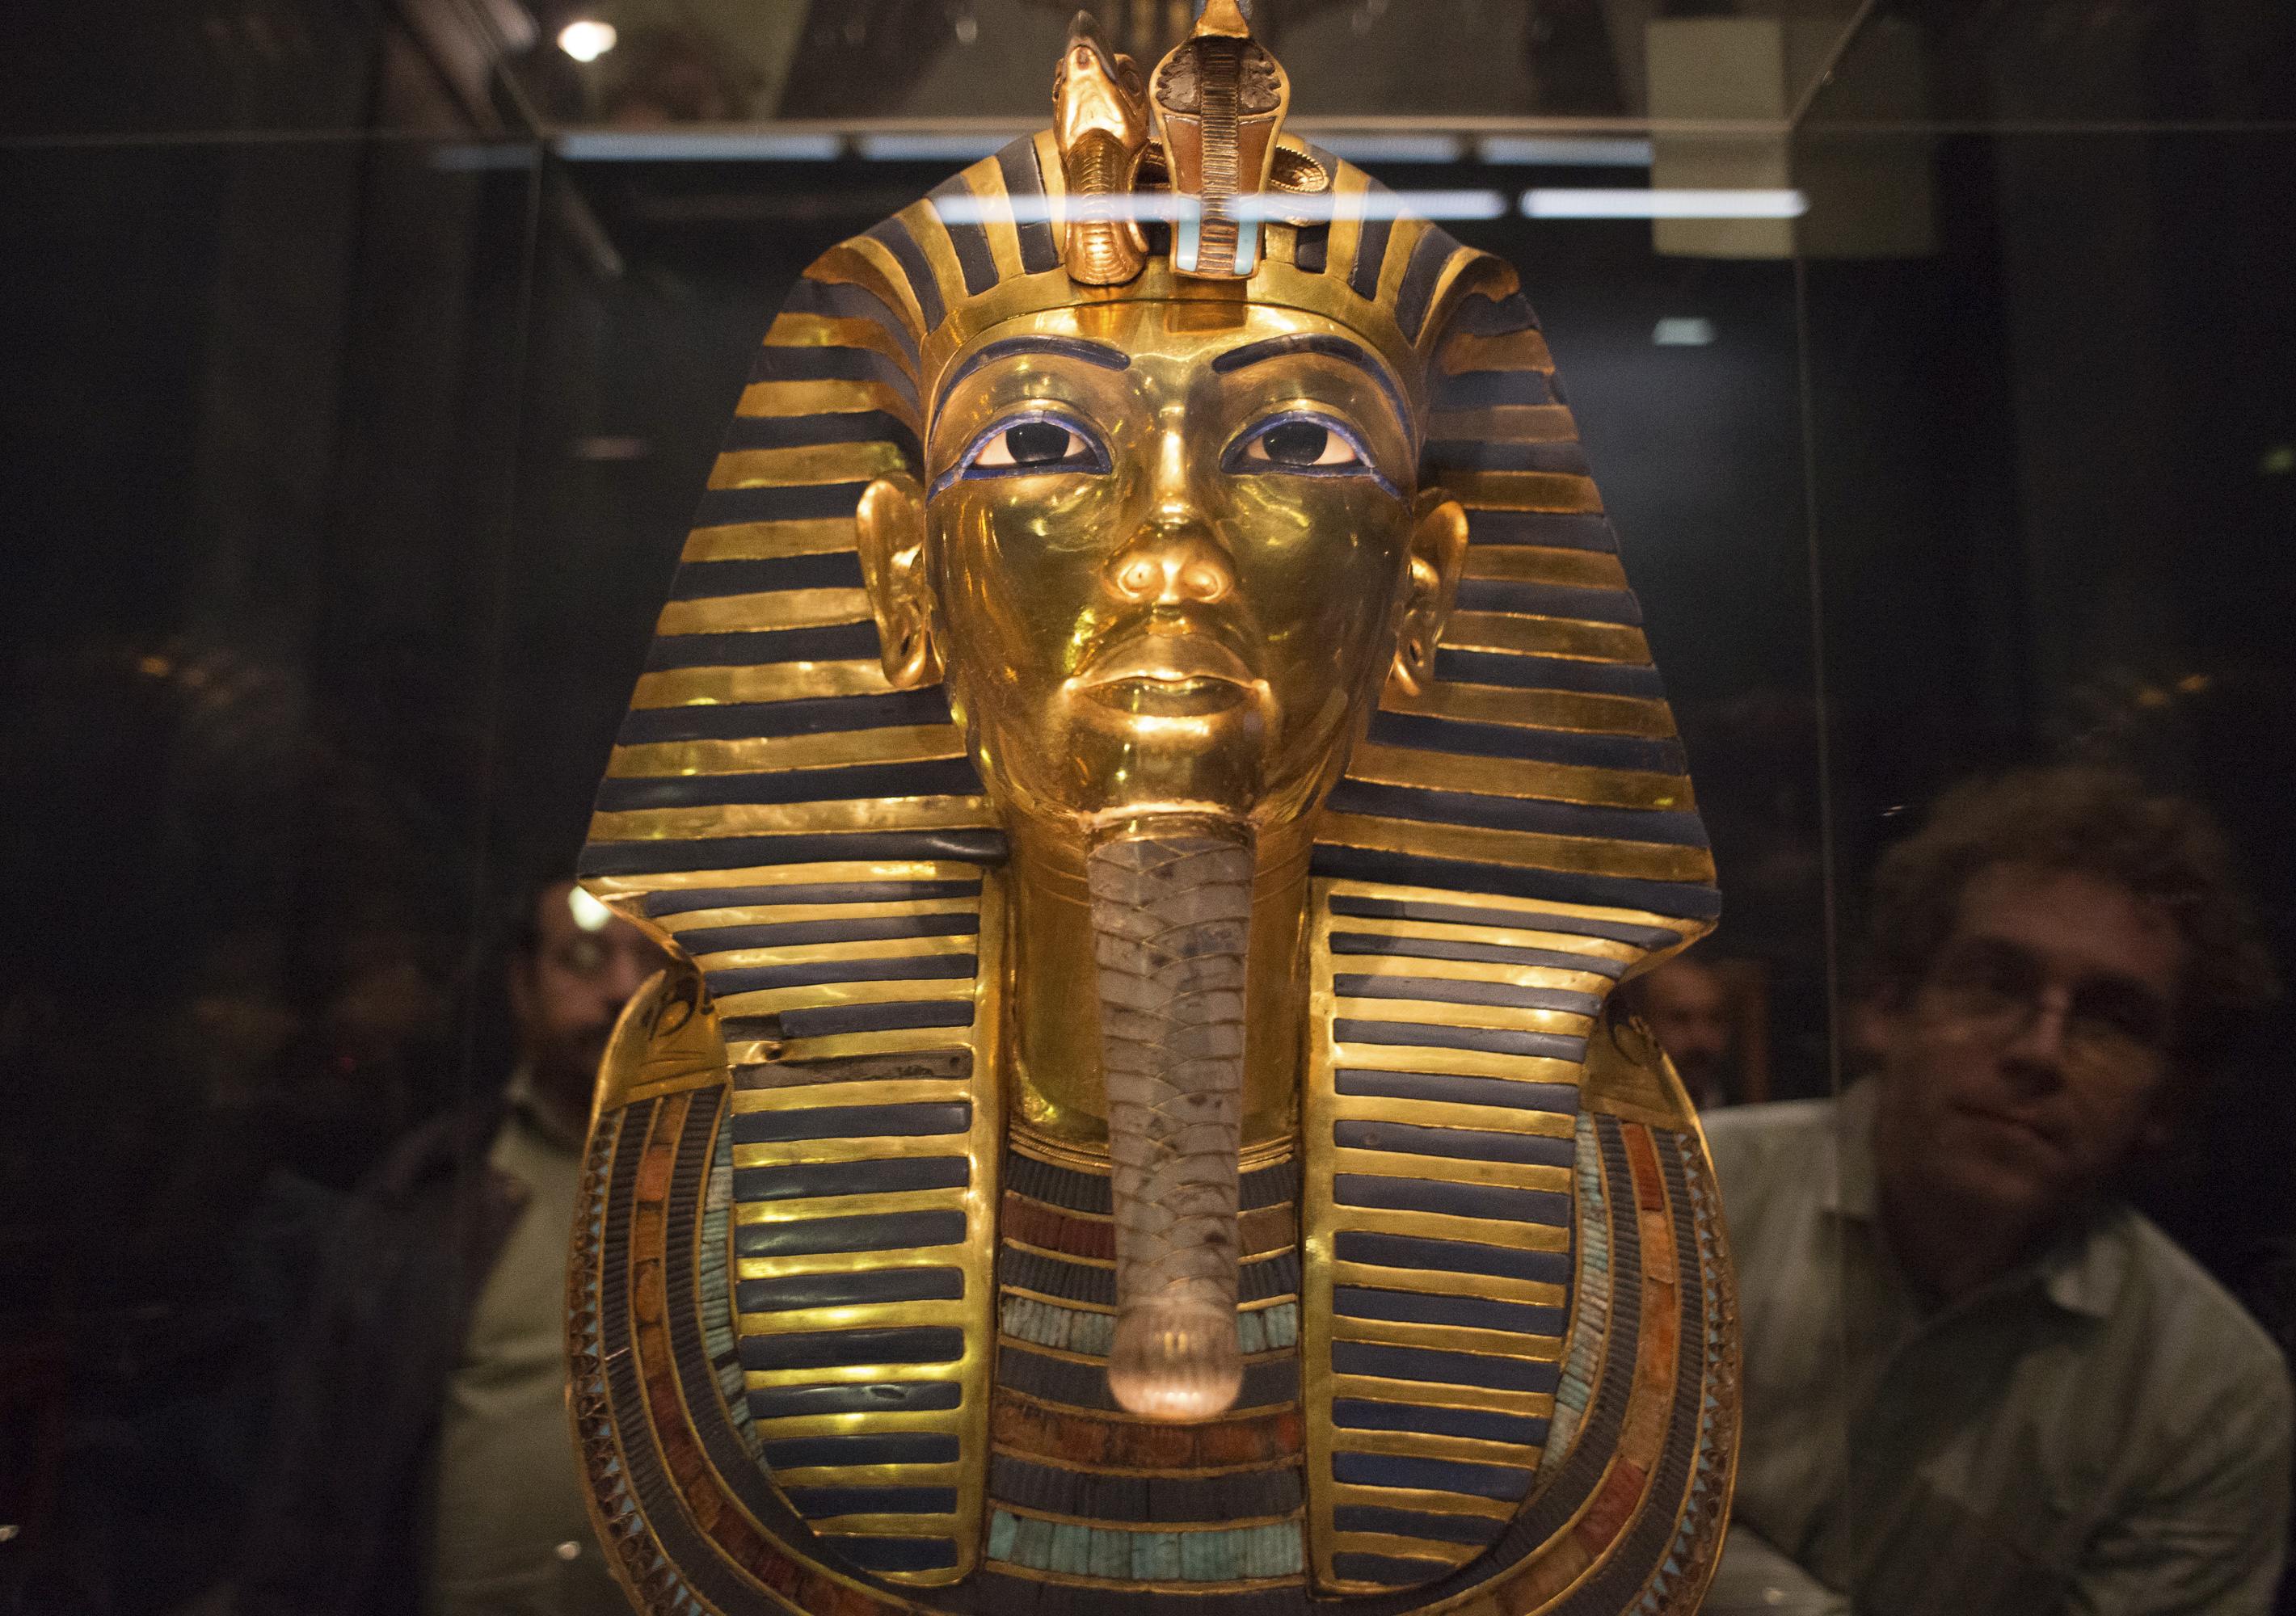 Egypt museum admits King Tut's beard broke off and was glued back